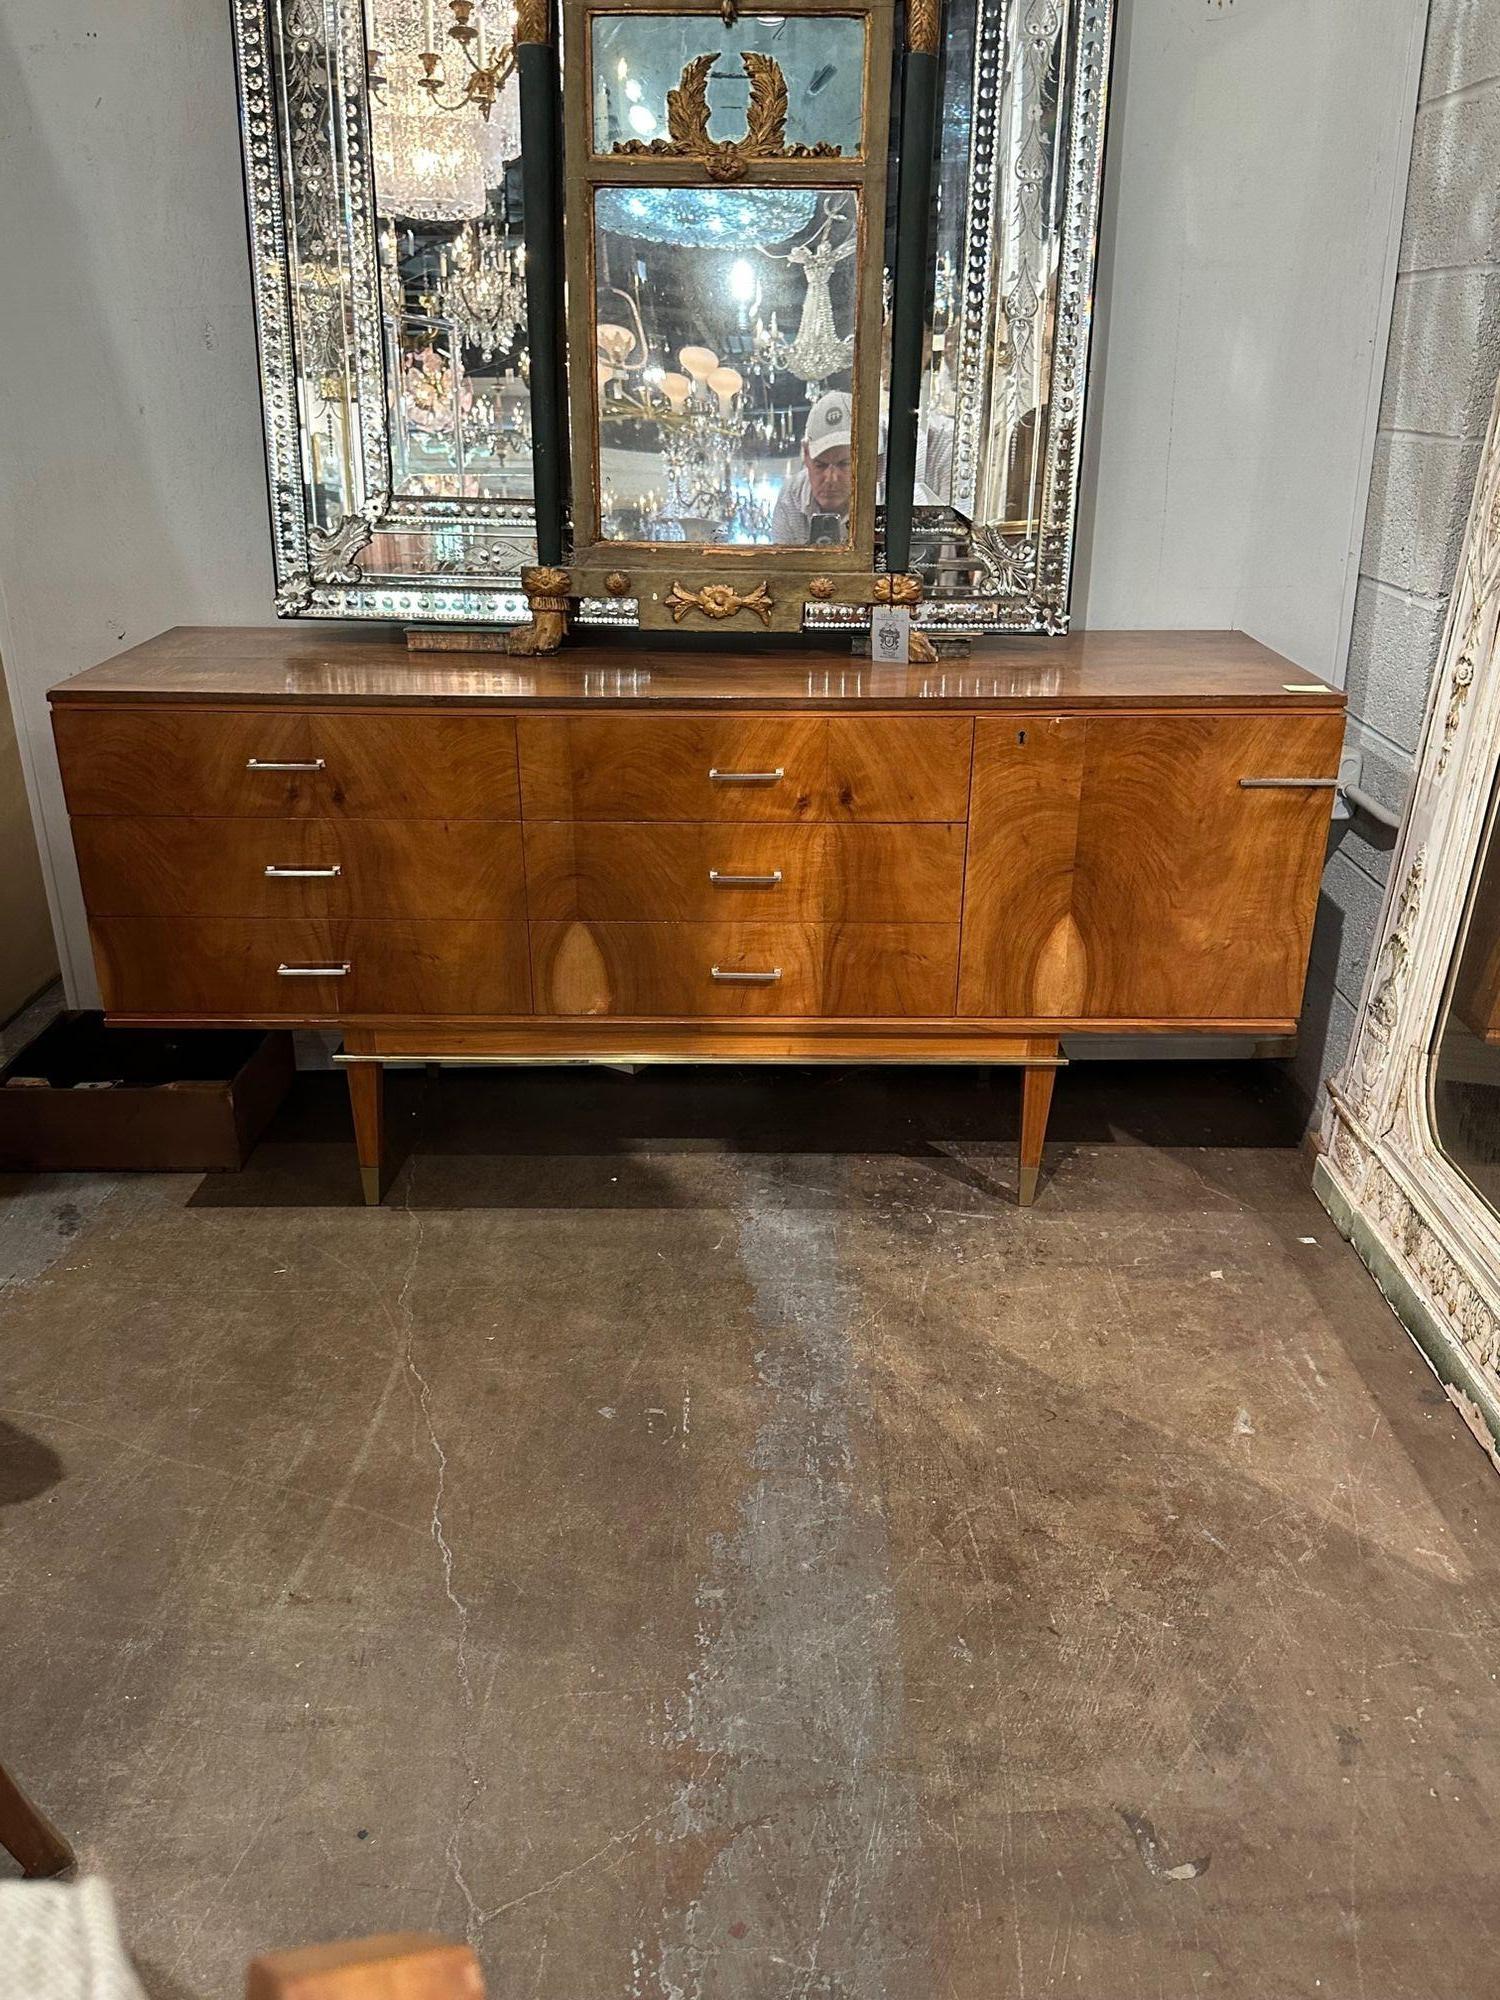 Handsome Italian Mid-Century Modern walnut and brass dresser. Circa 1960. Adds warmth and charm to any room!